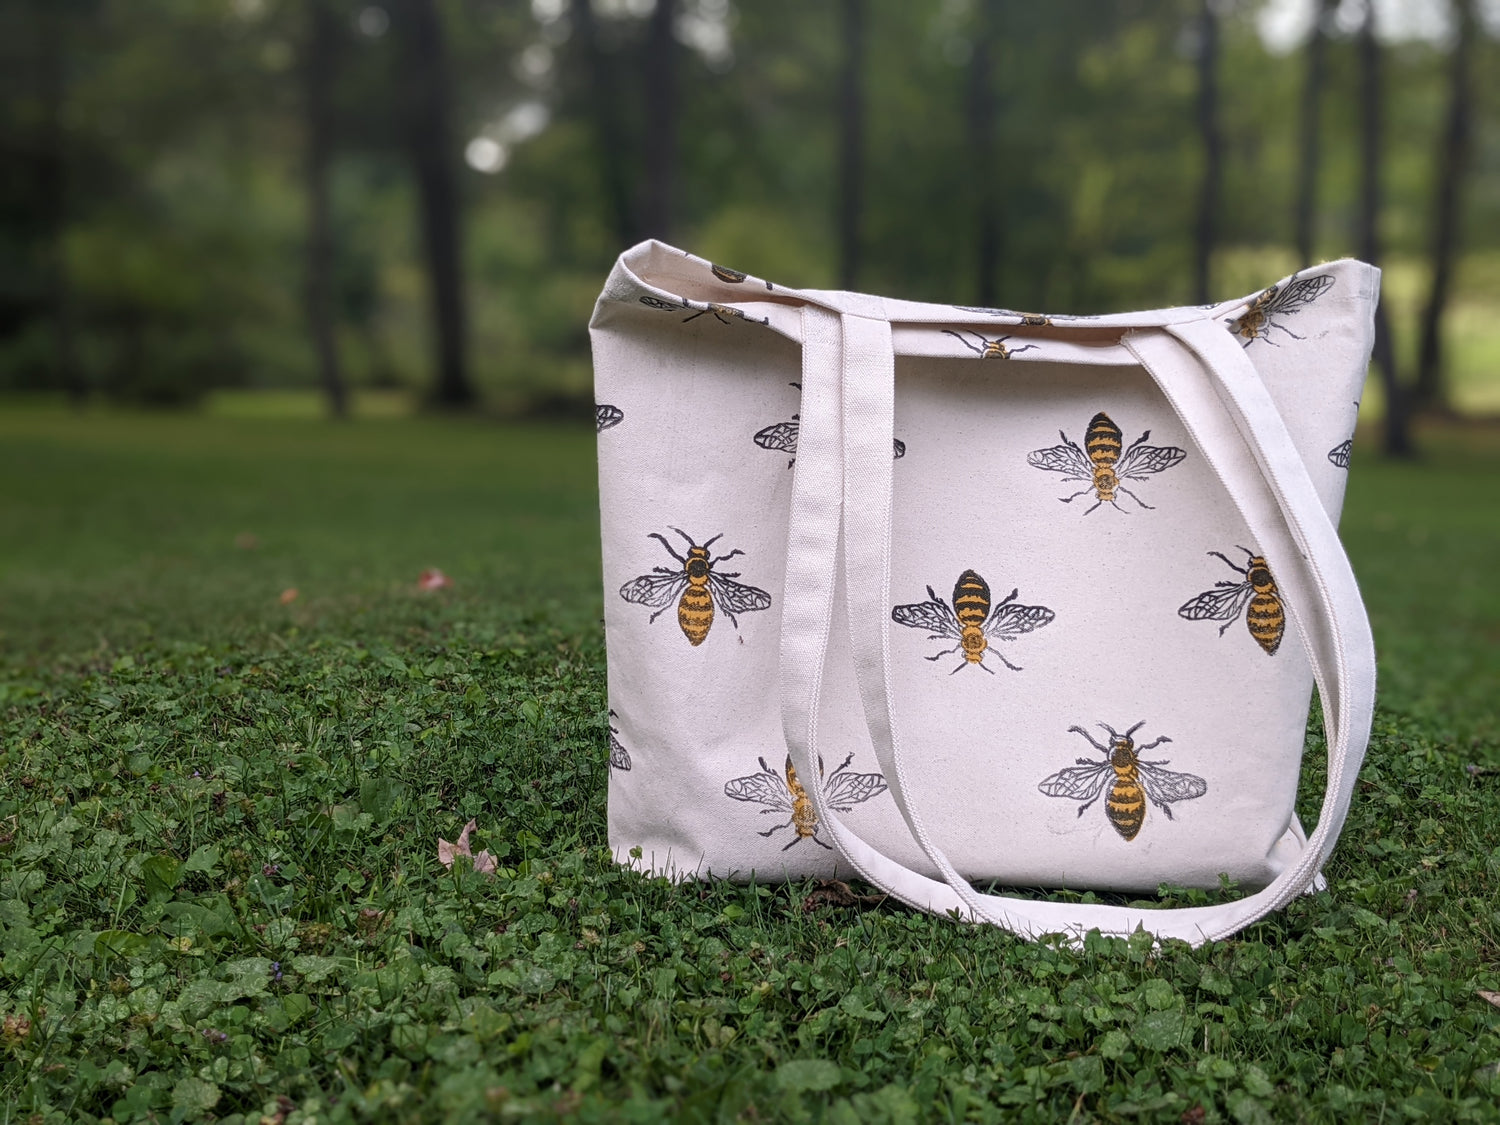 bee block printed tote bag sitting in grassy area with trees in background